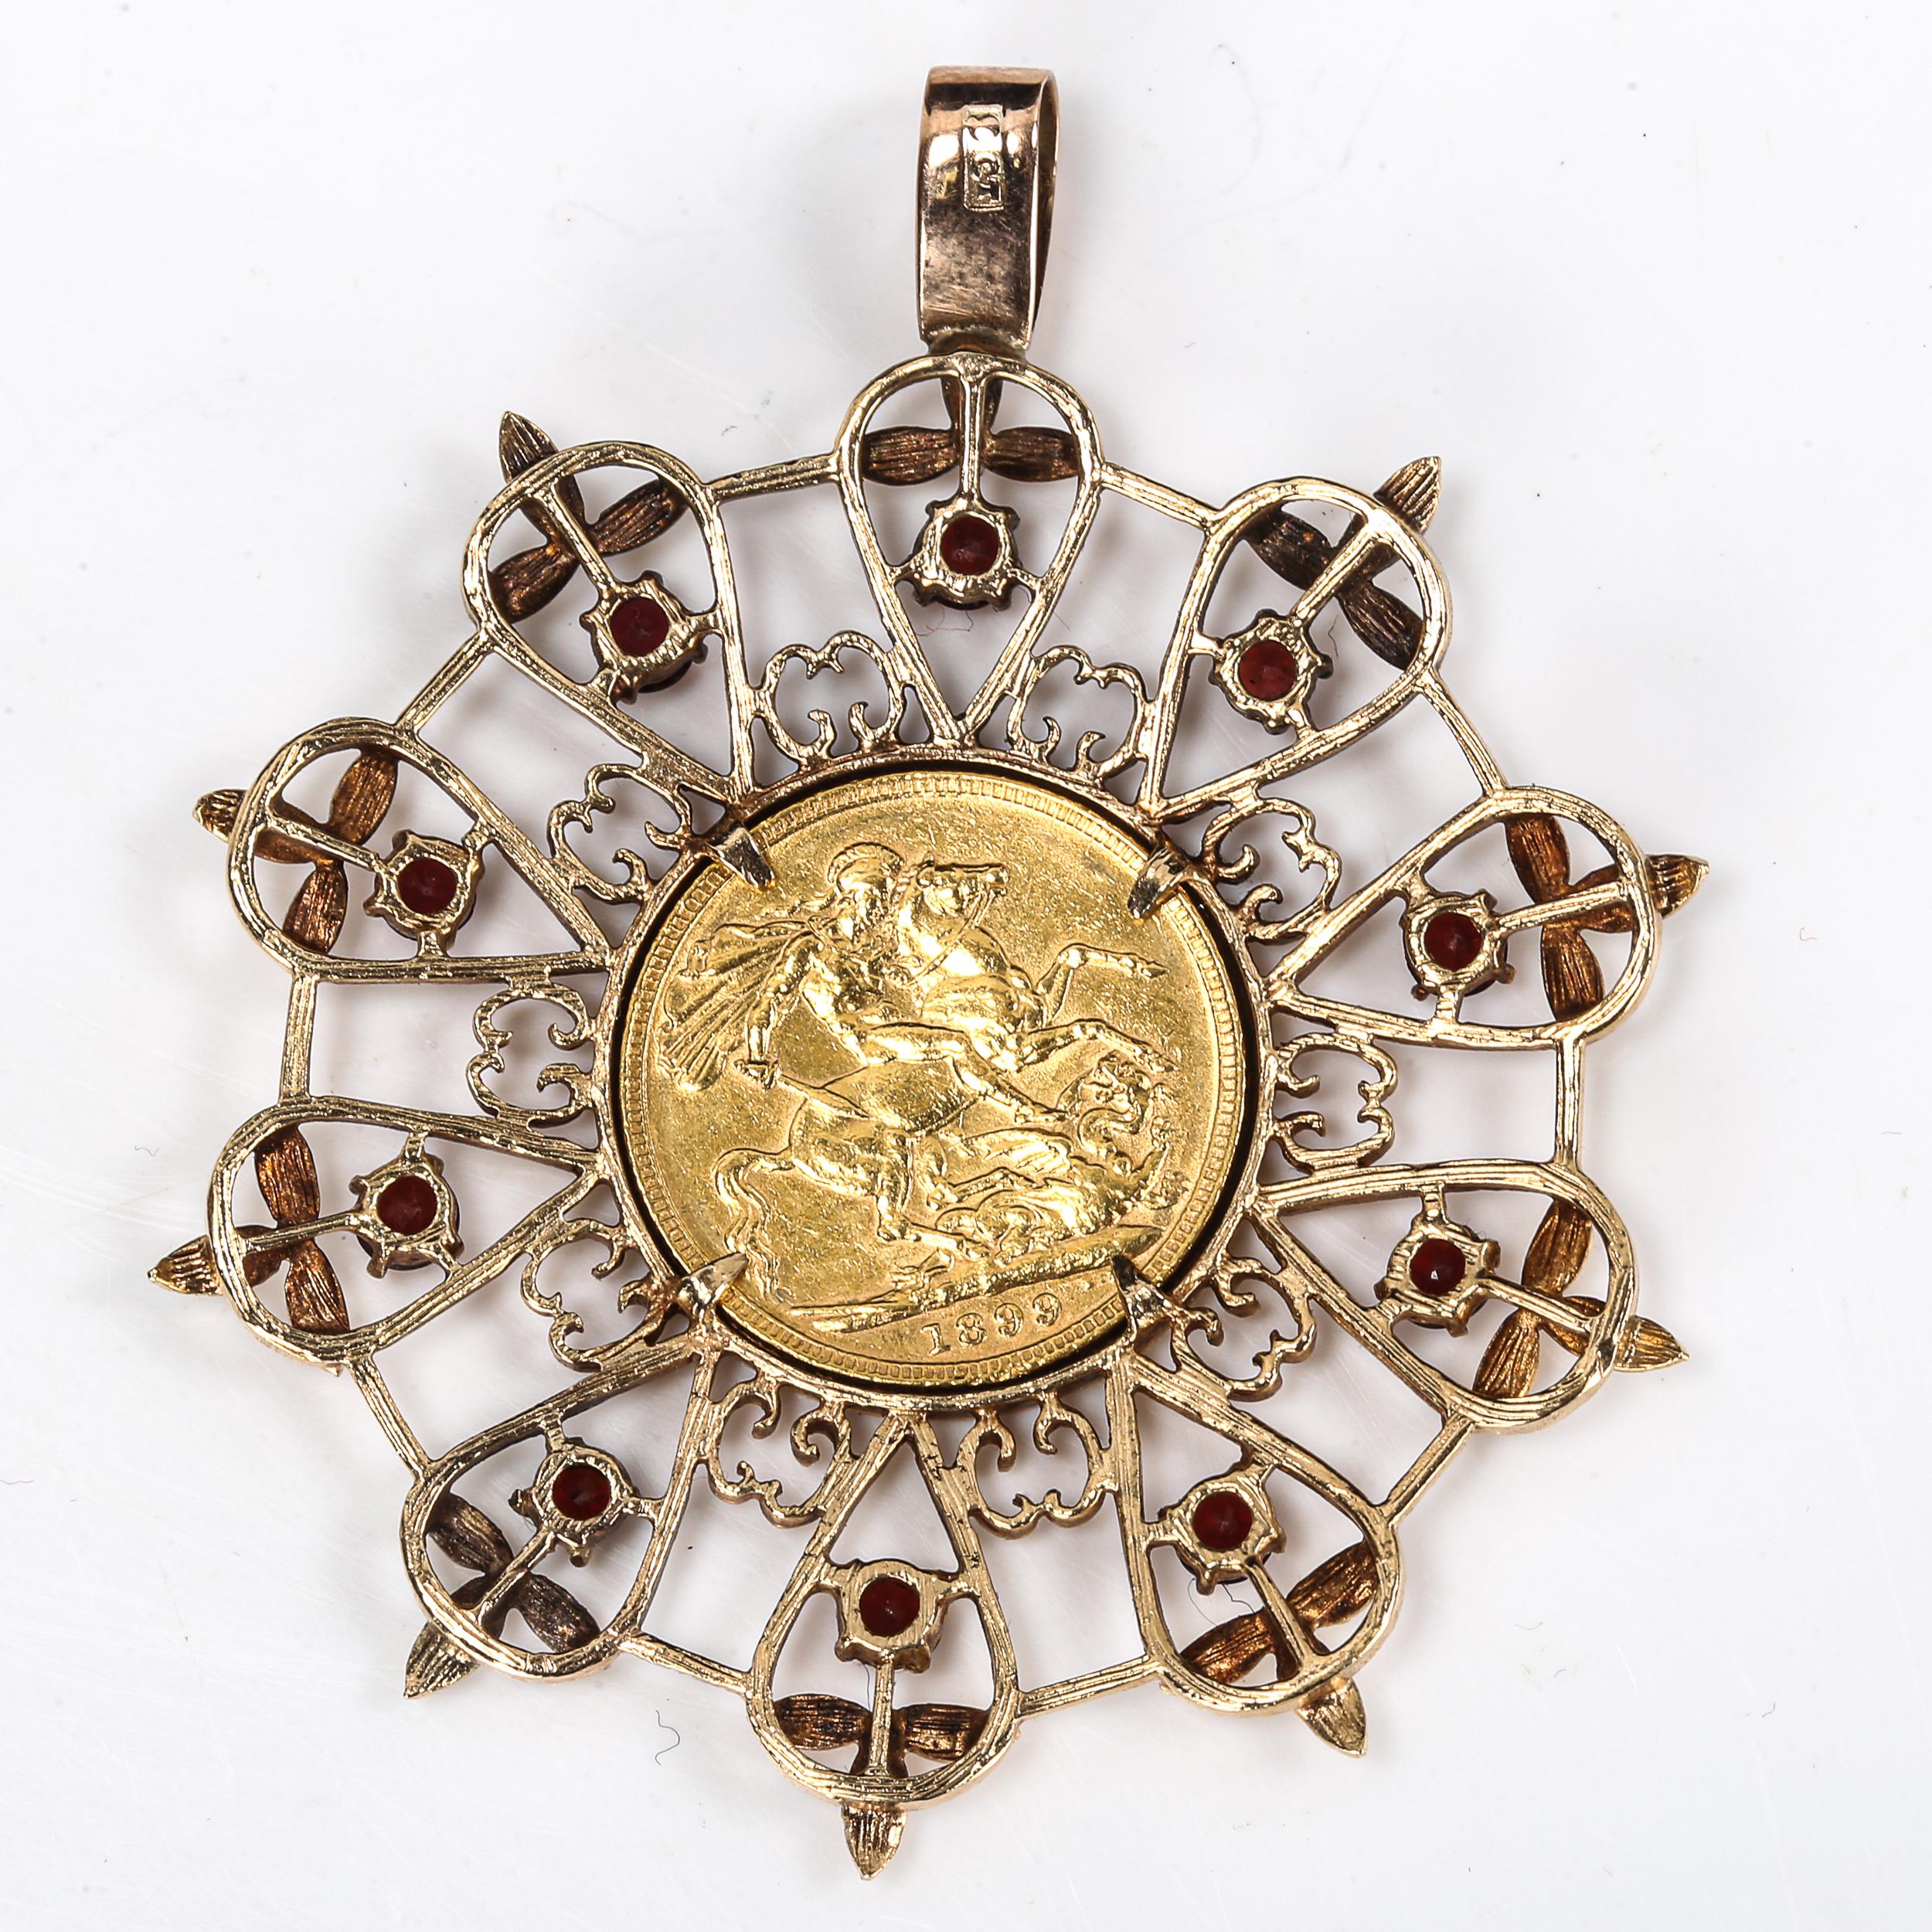 A Queen Victoria 1899 full sovereign gold coin, in large 9ct gold garnet openwork pendant mount, - Image 3 of 4